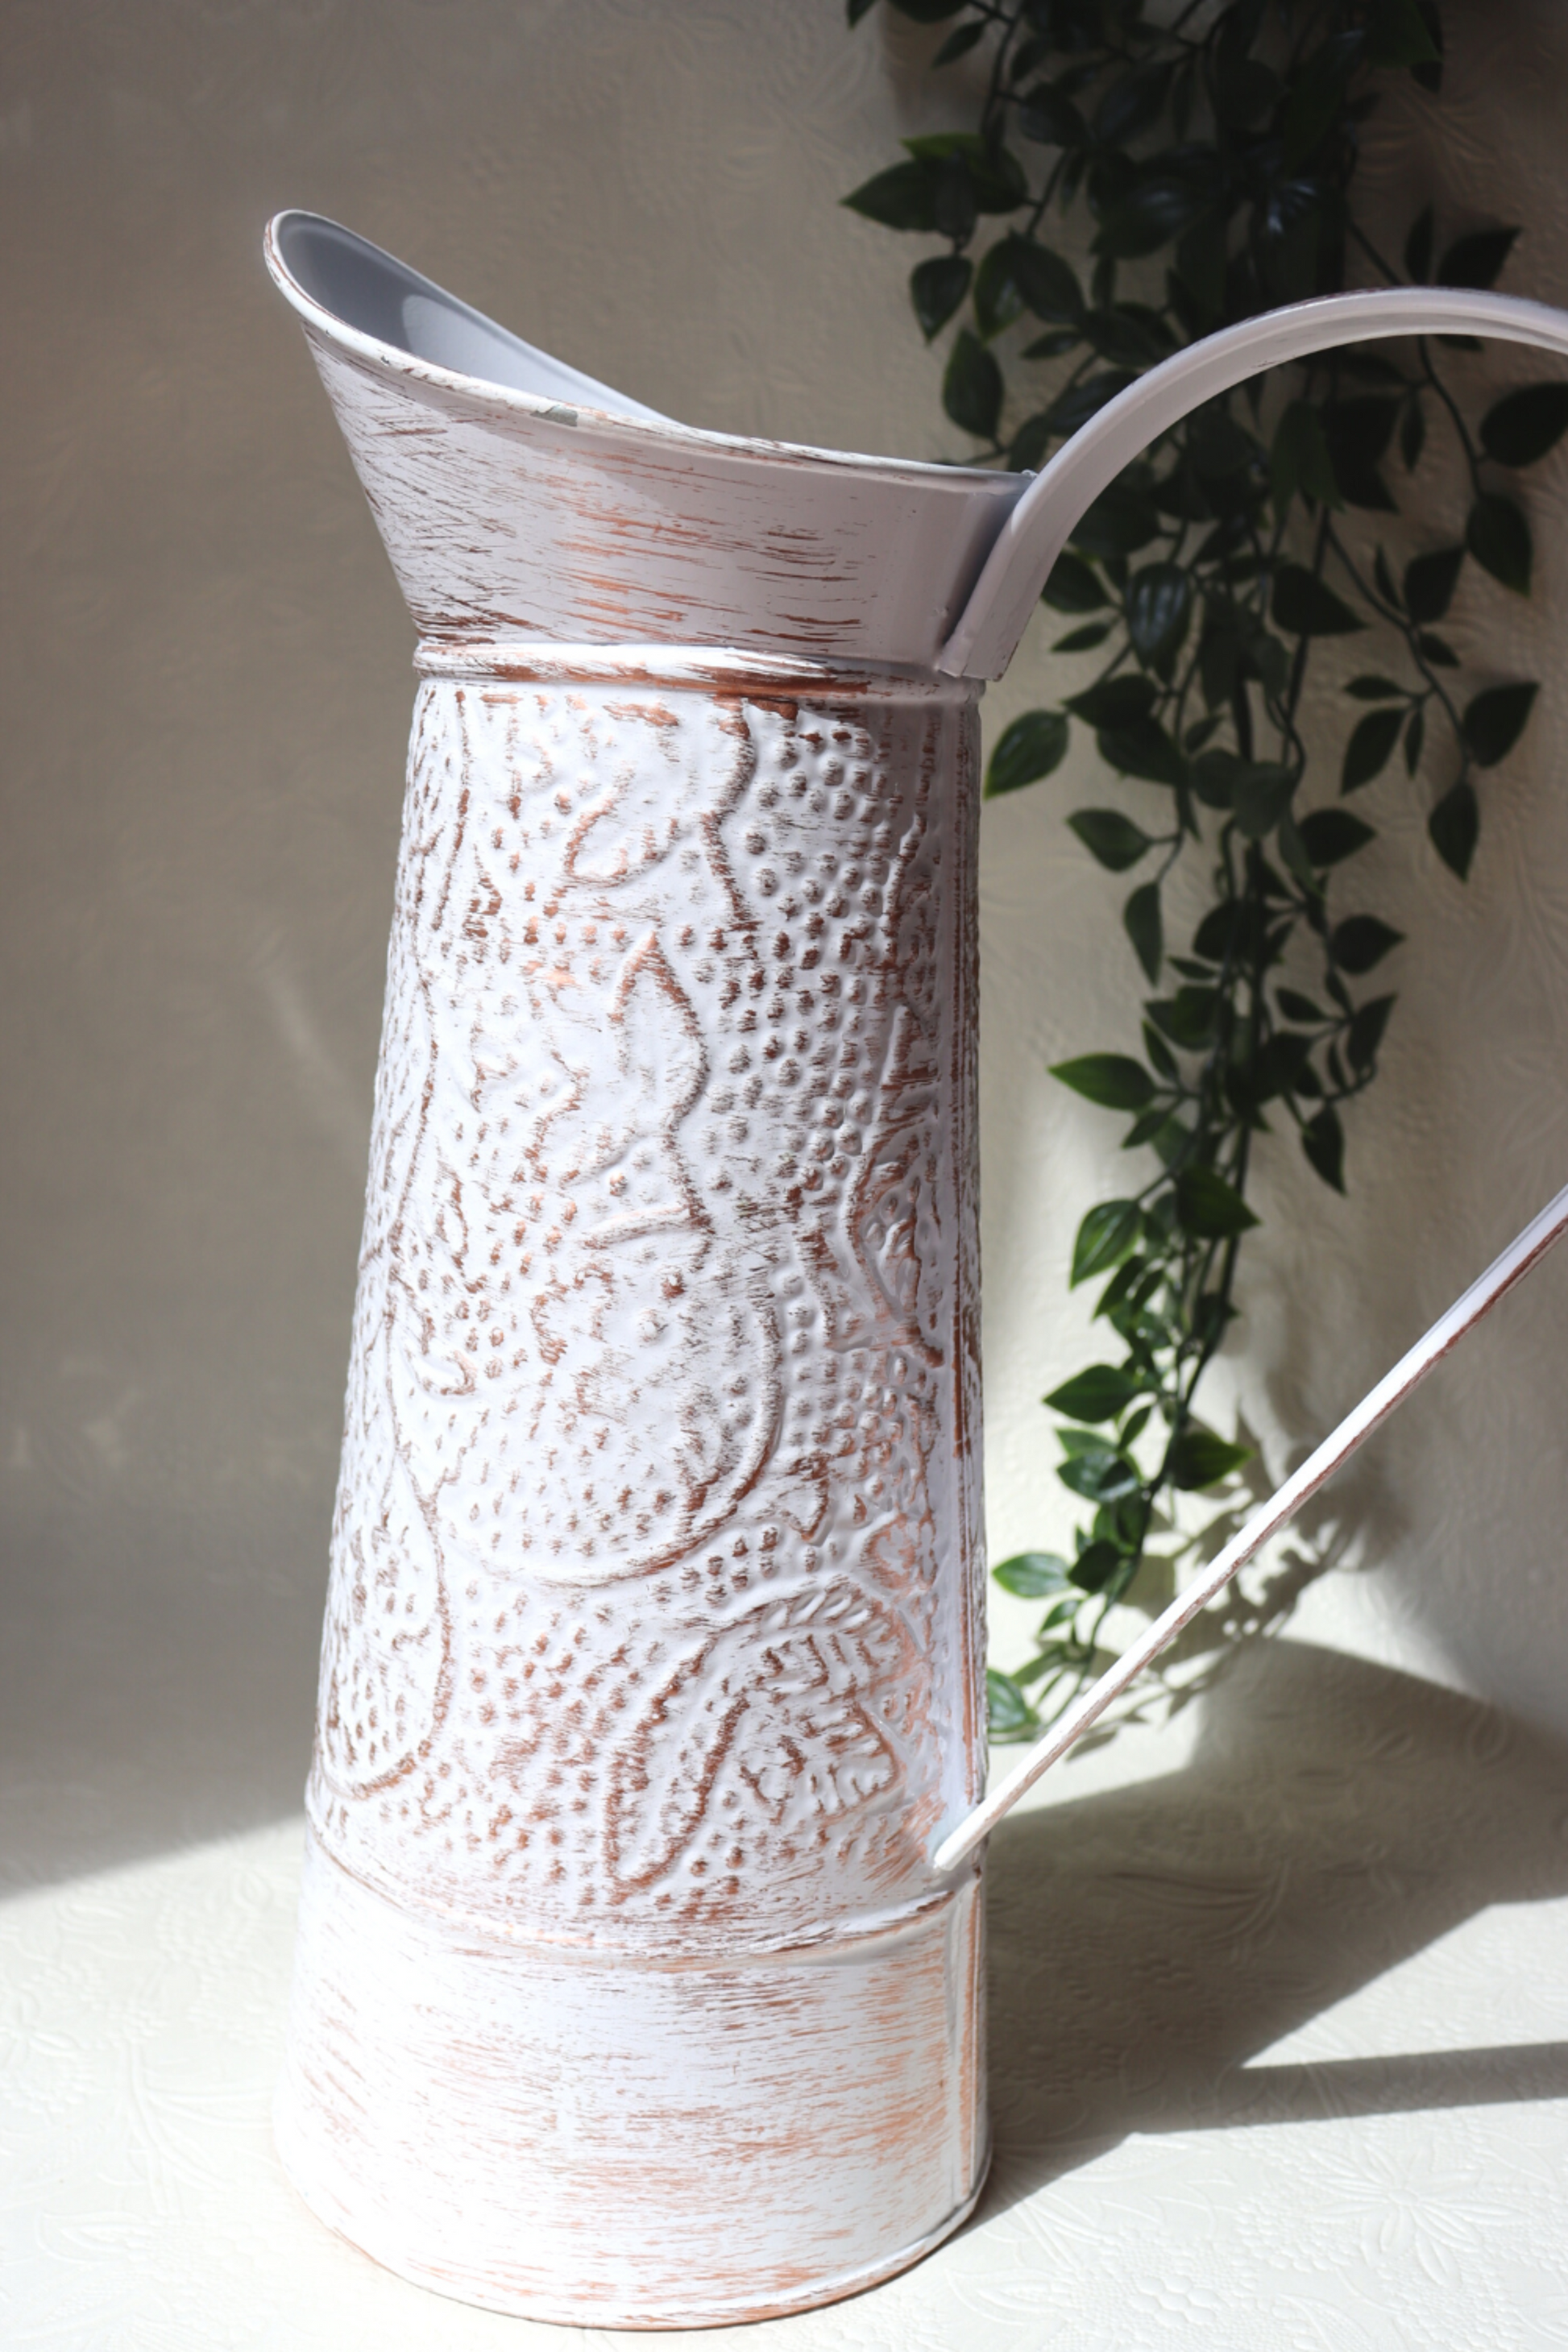 White Watering Metal Can/Jug - Copper finish, 32.5 cm, 3 Litres, Plant Lover Gift - Aksa Home Decor 